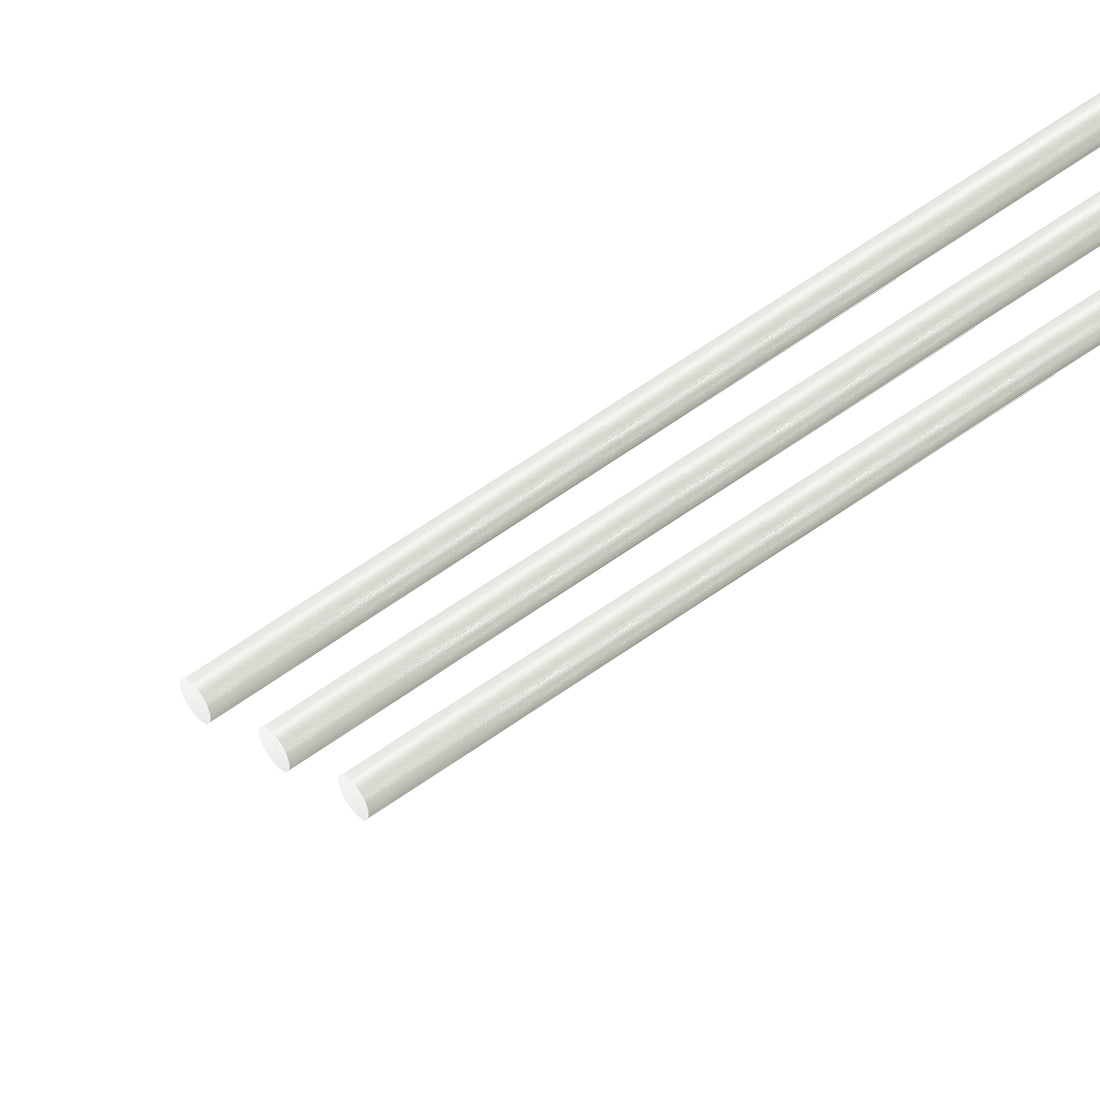 uxcell Uxcell FRP Fiberglass Round Rod,2mm Dia 50cm Long White Engineering Round Bars 3pcs